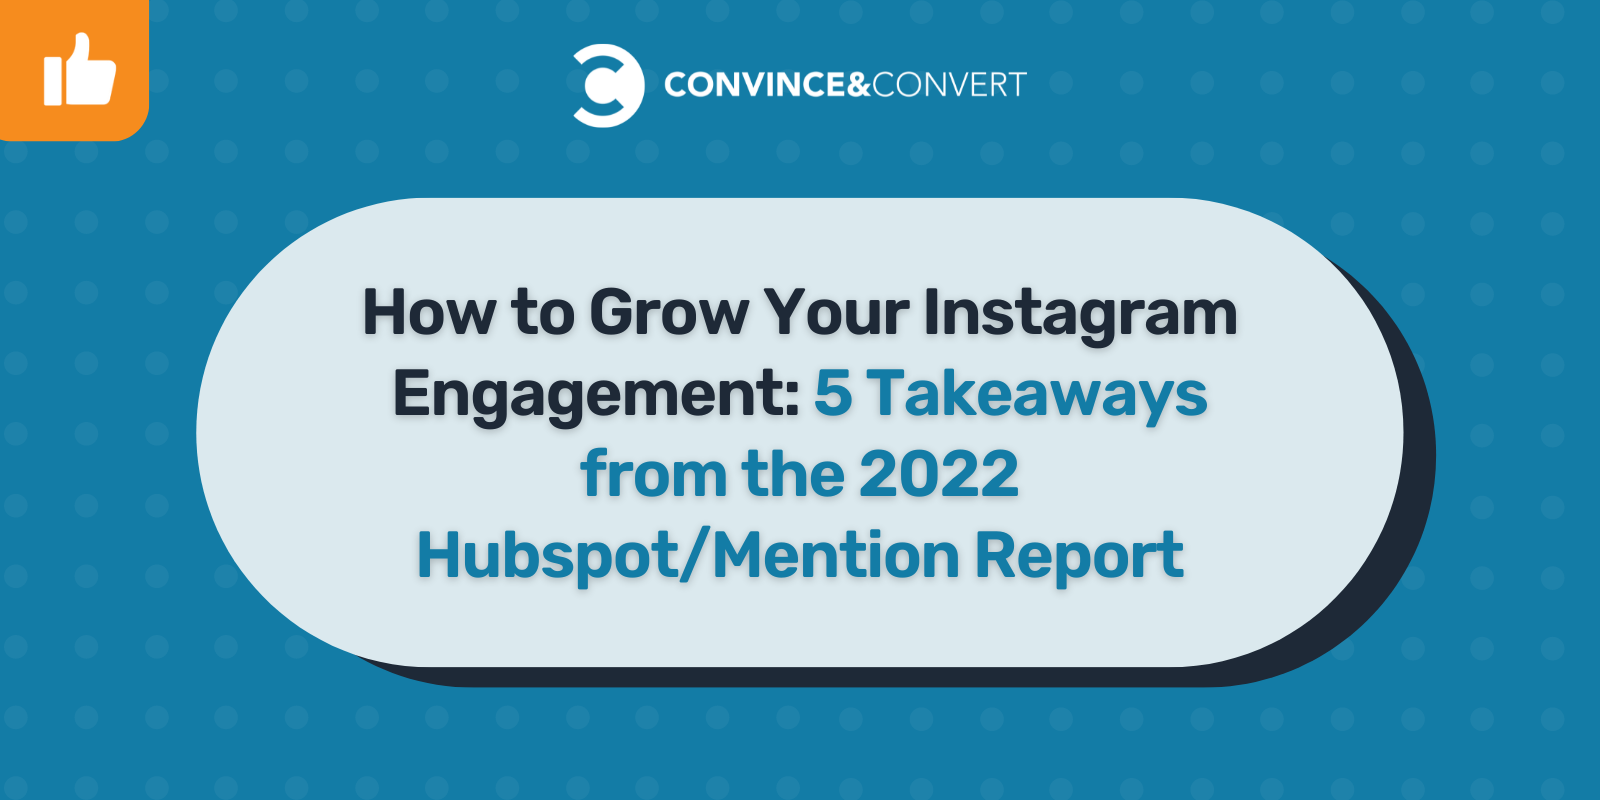 How to Grow Your Instagram Engagement: 5 Takeaways from the 2022 Hubspot/Mention Report